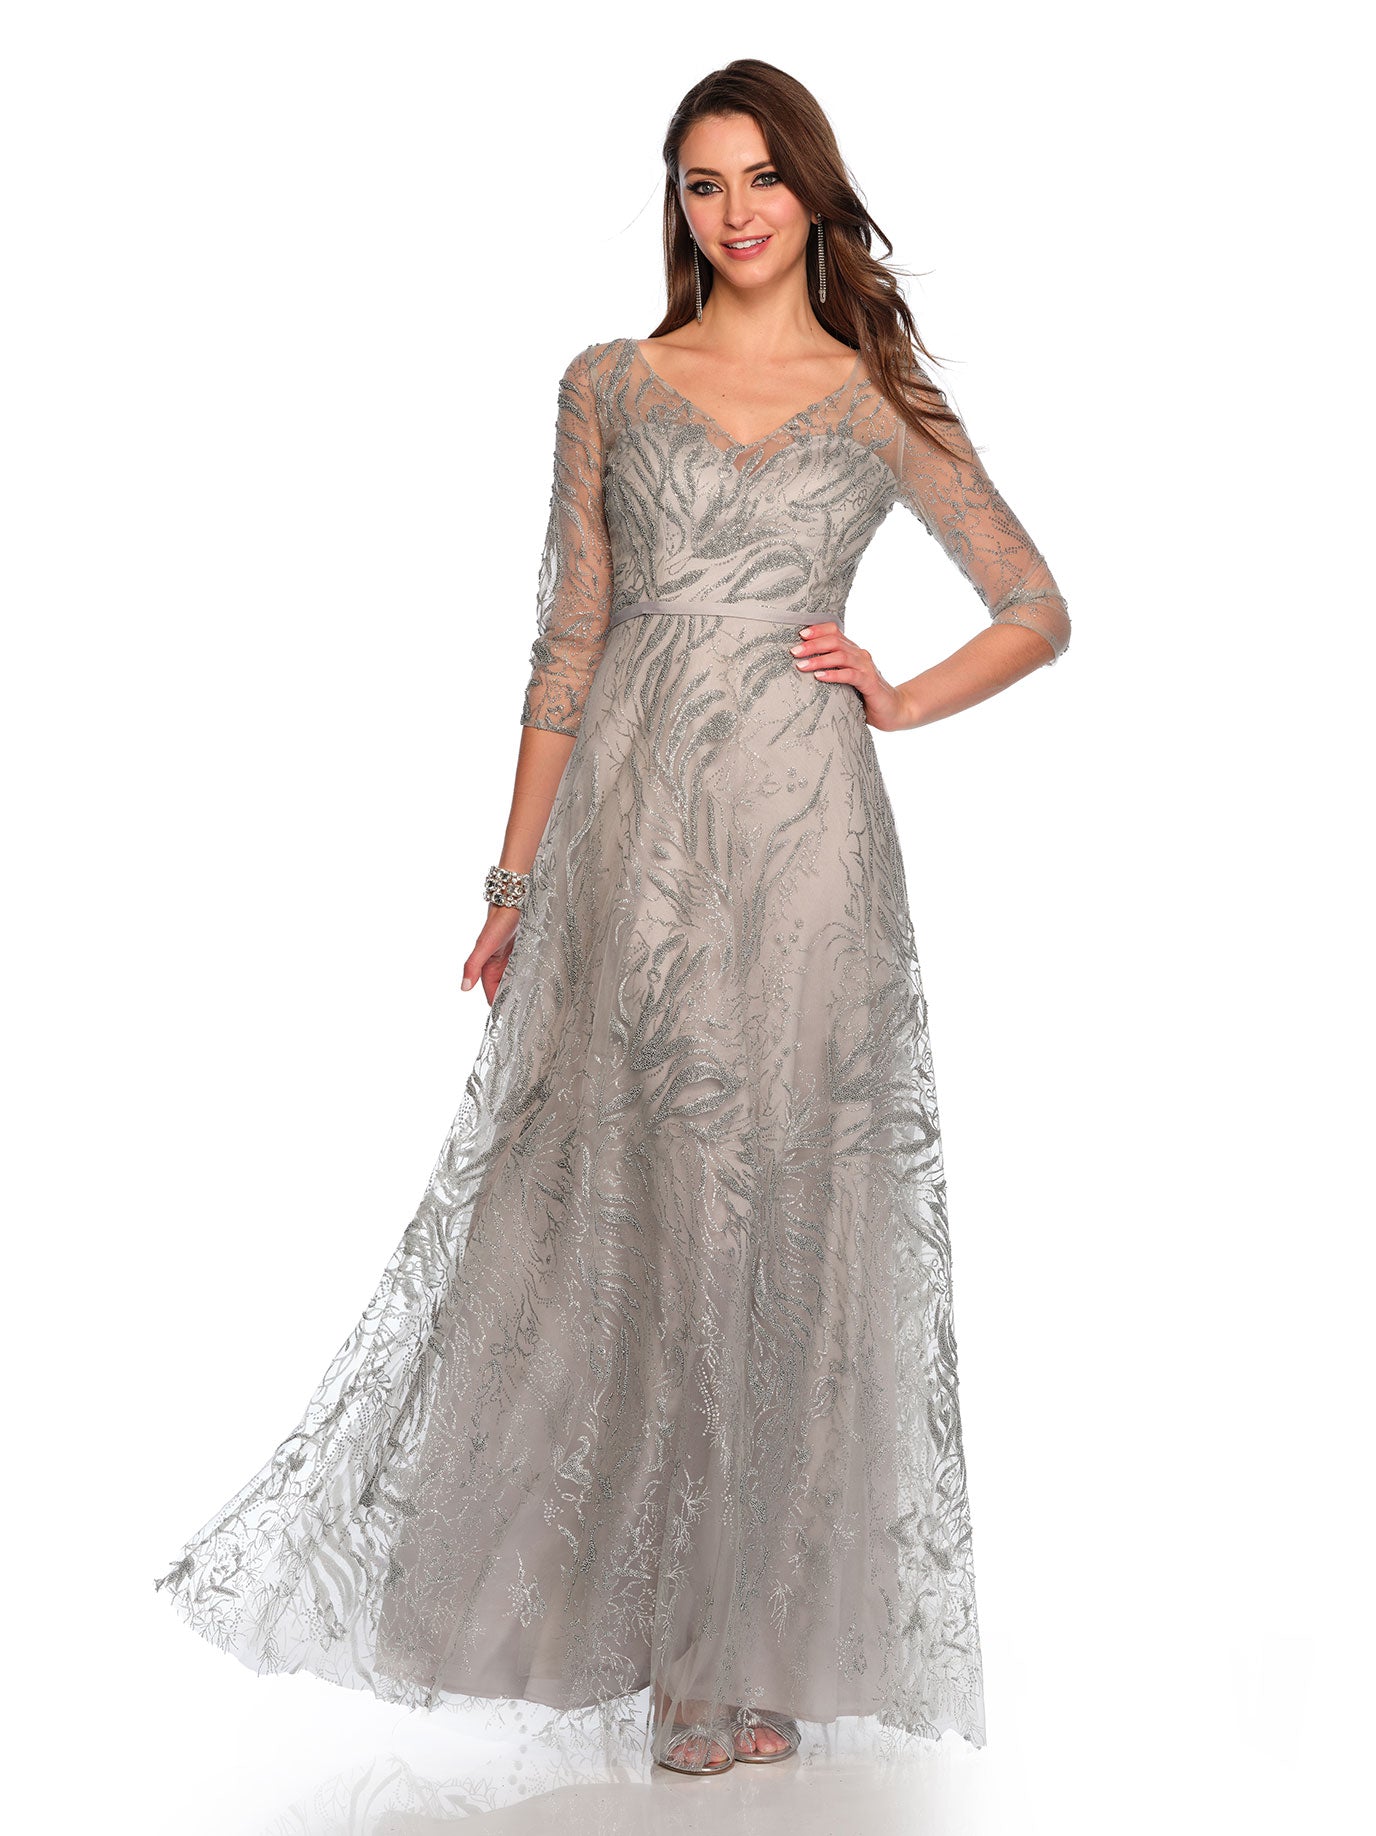 LONG SLEEVE BEADED GOWN